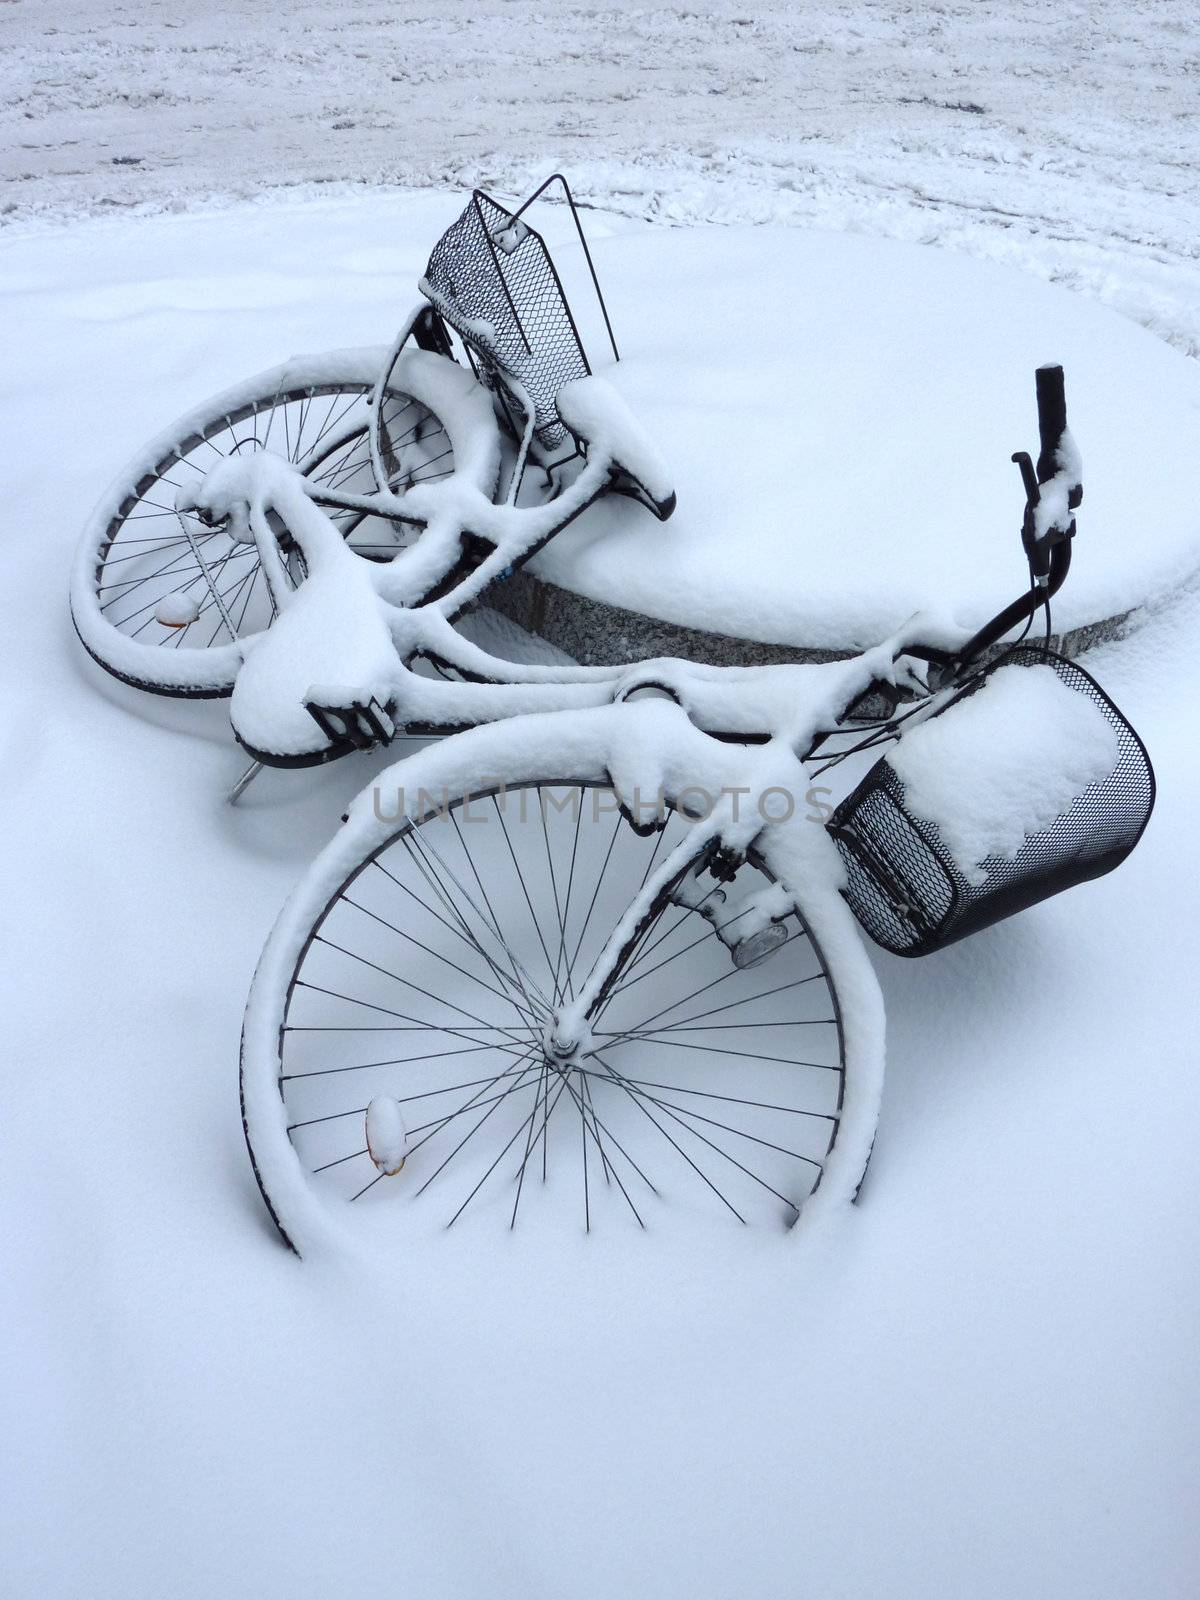 Fallen bicycle covered by snow by Elenaphotos21